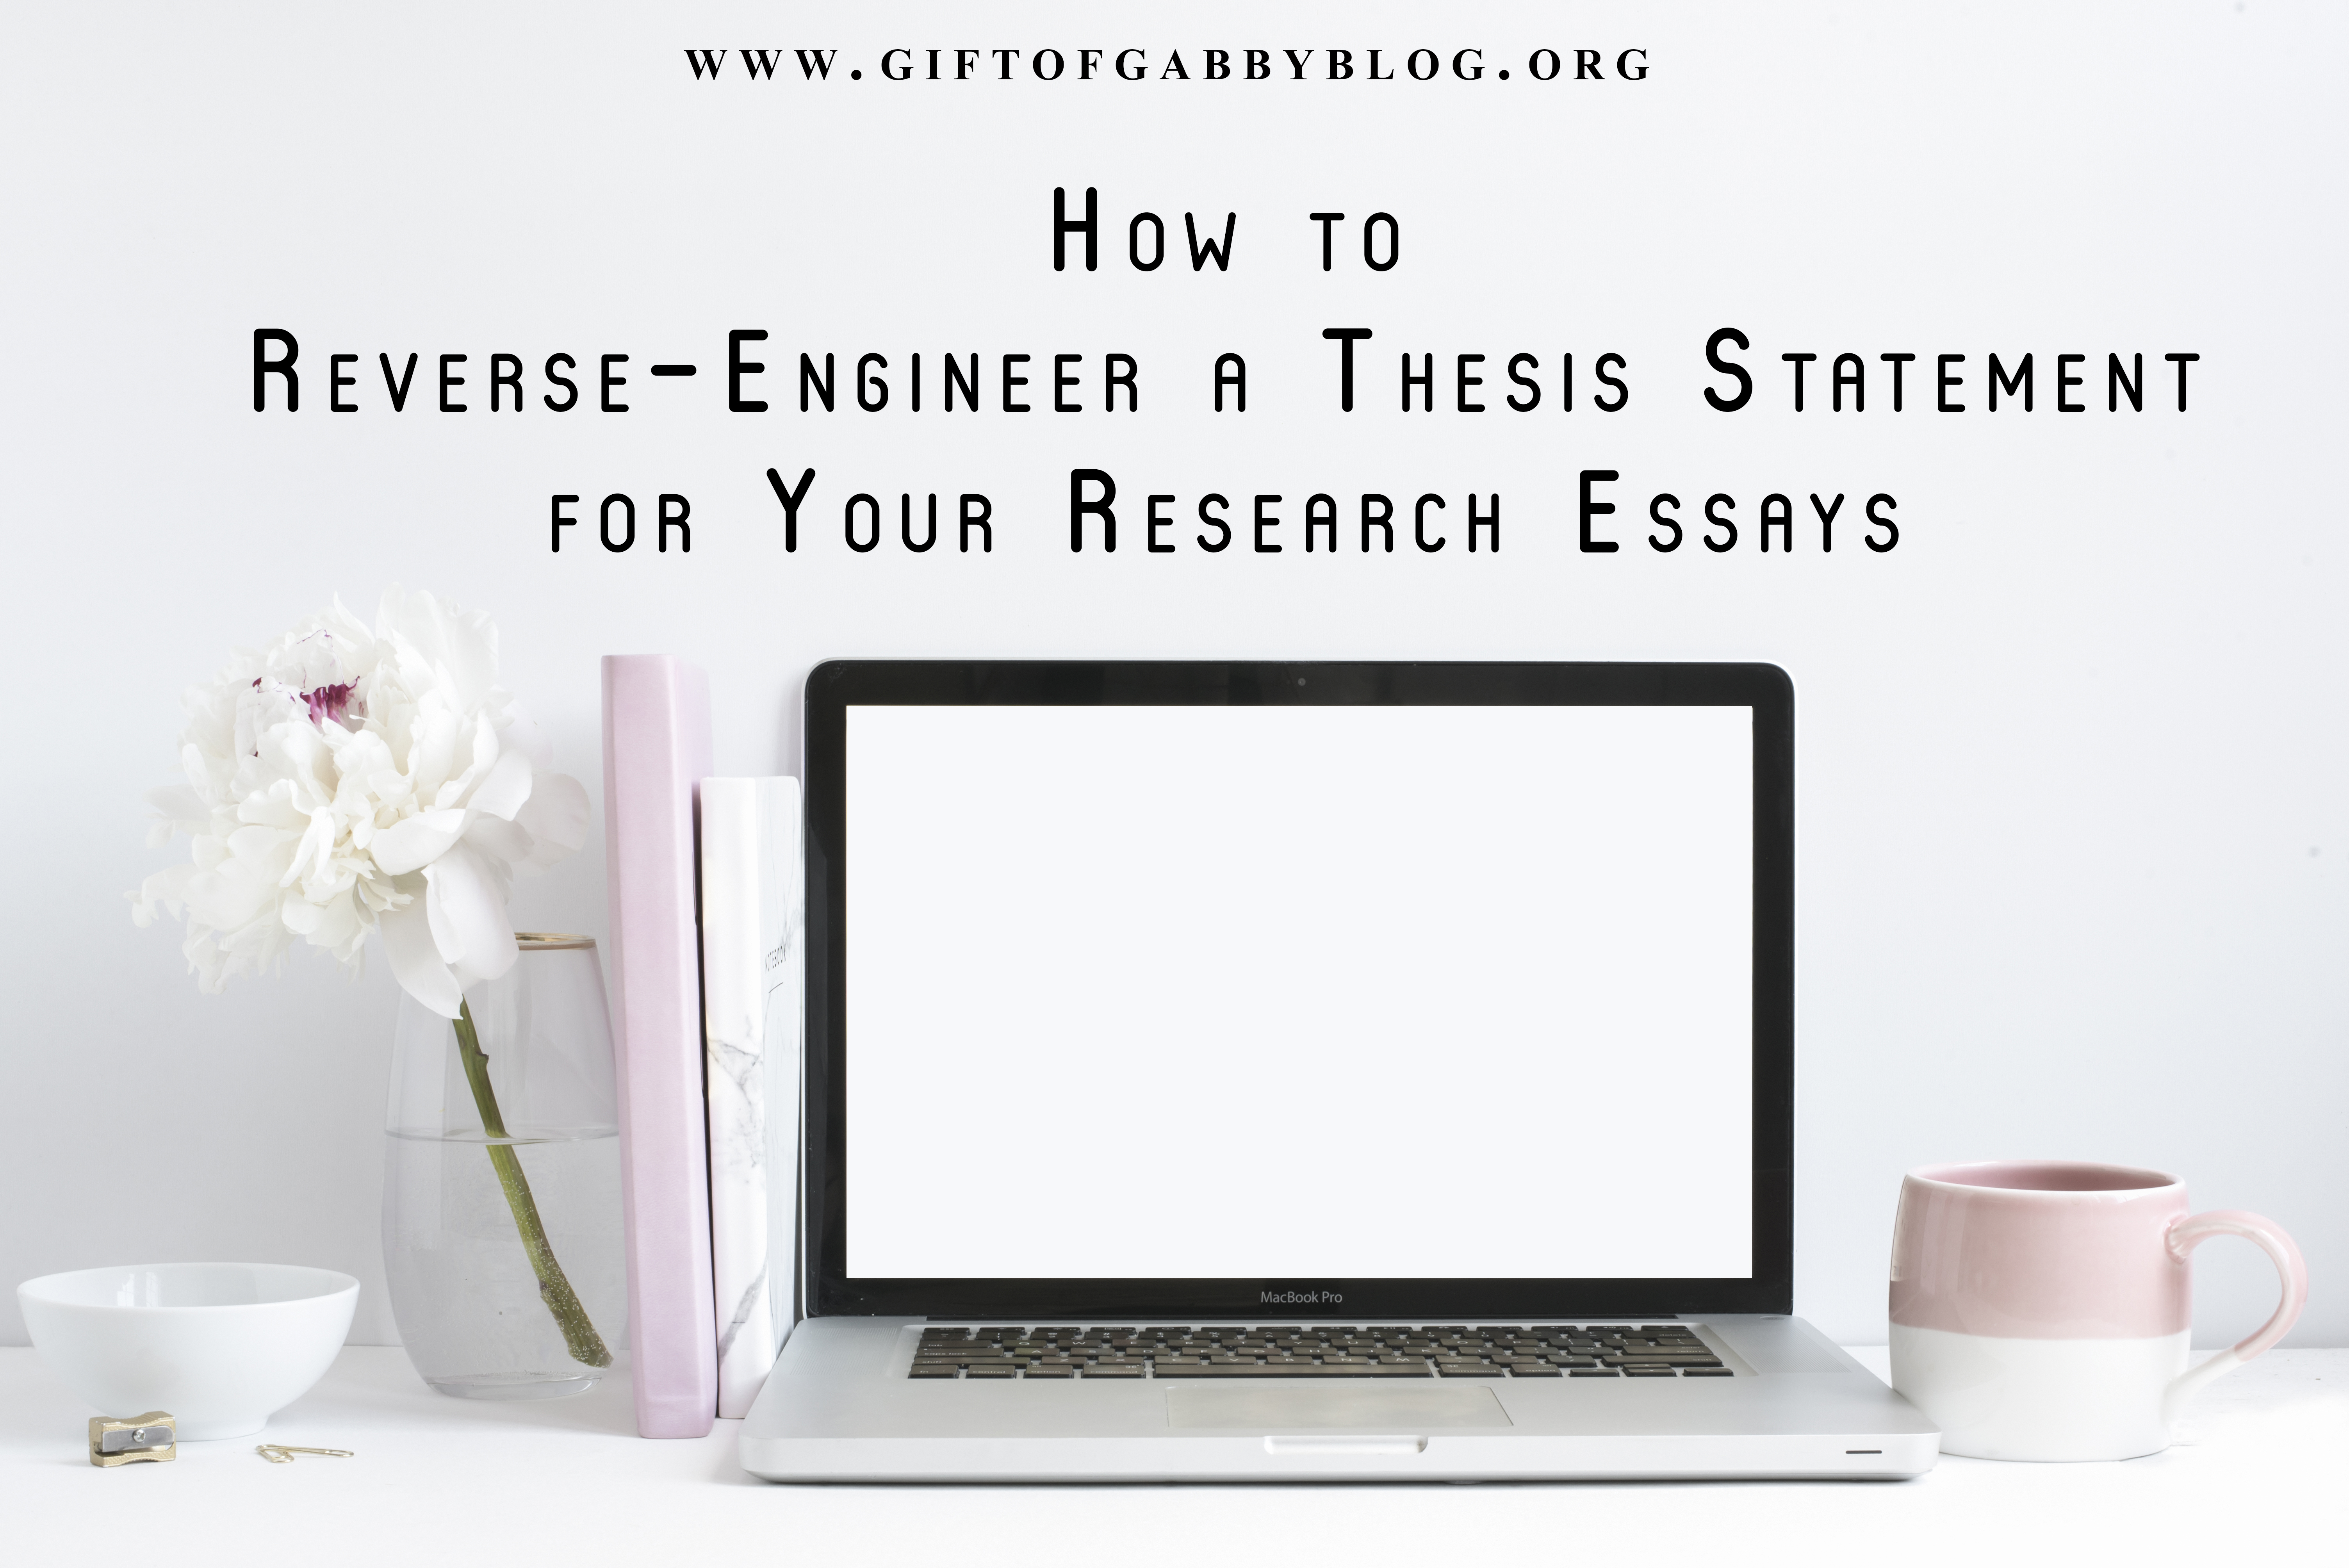 _giftofgabby_2017_How-To-Reverse-Engineer-A-Thesis-Statement-For-Your-Research-Essays